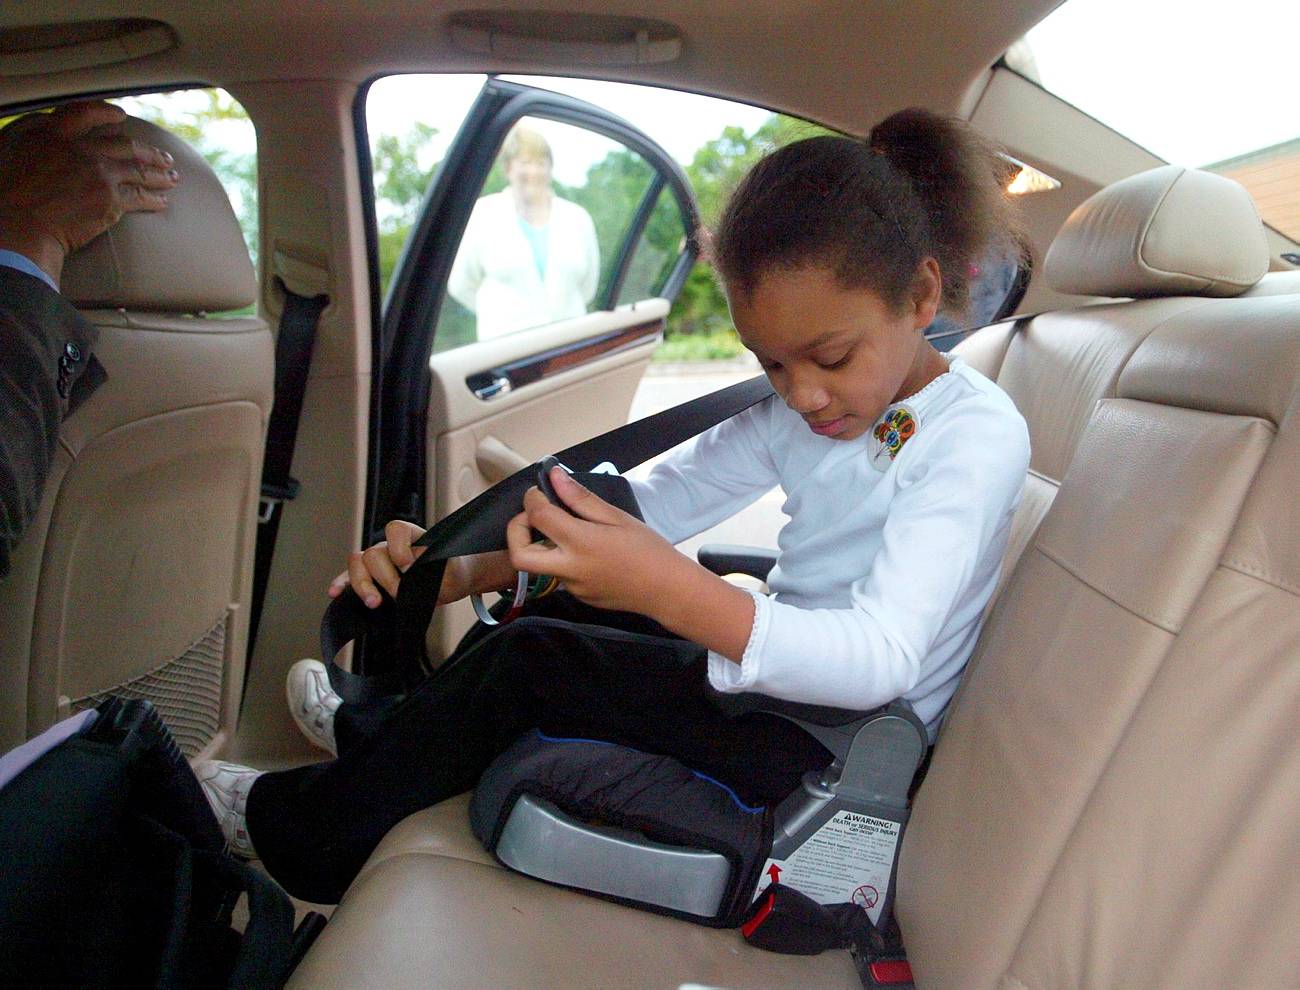 Booster Seat Laws Improve Child Safety